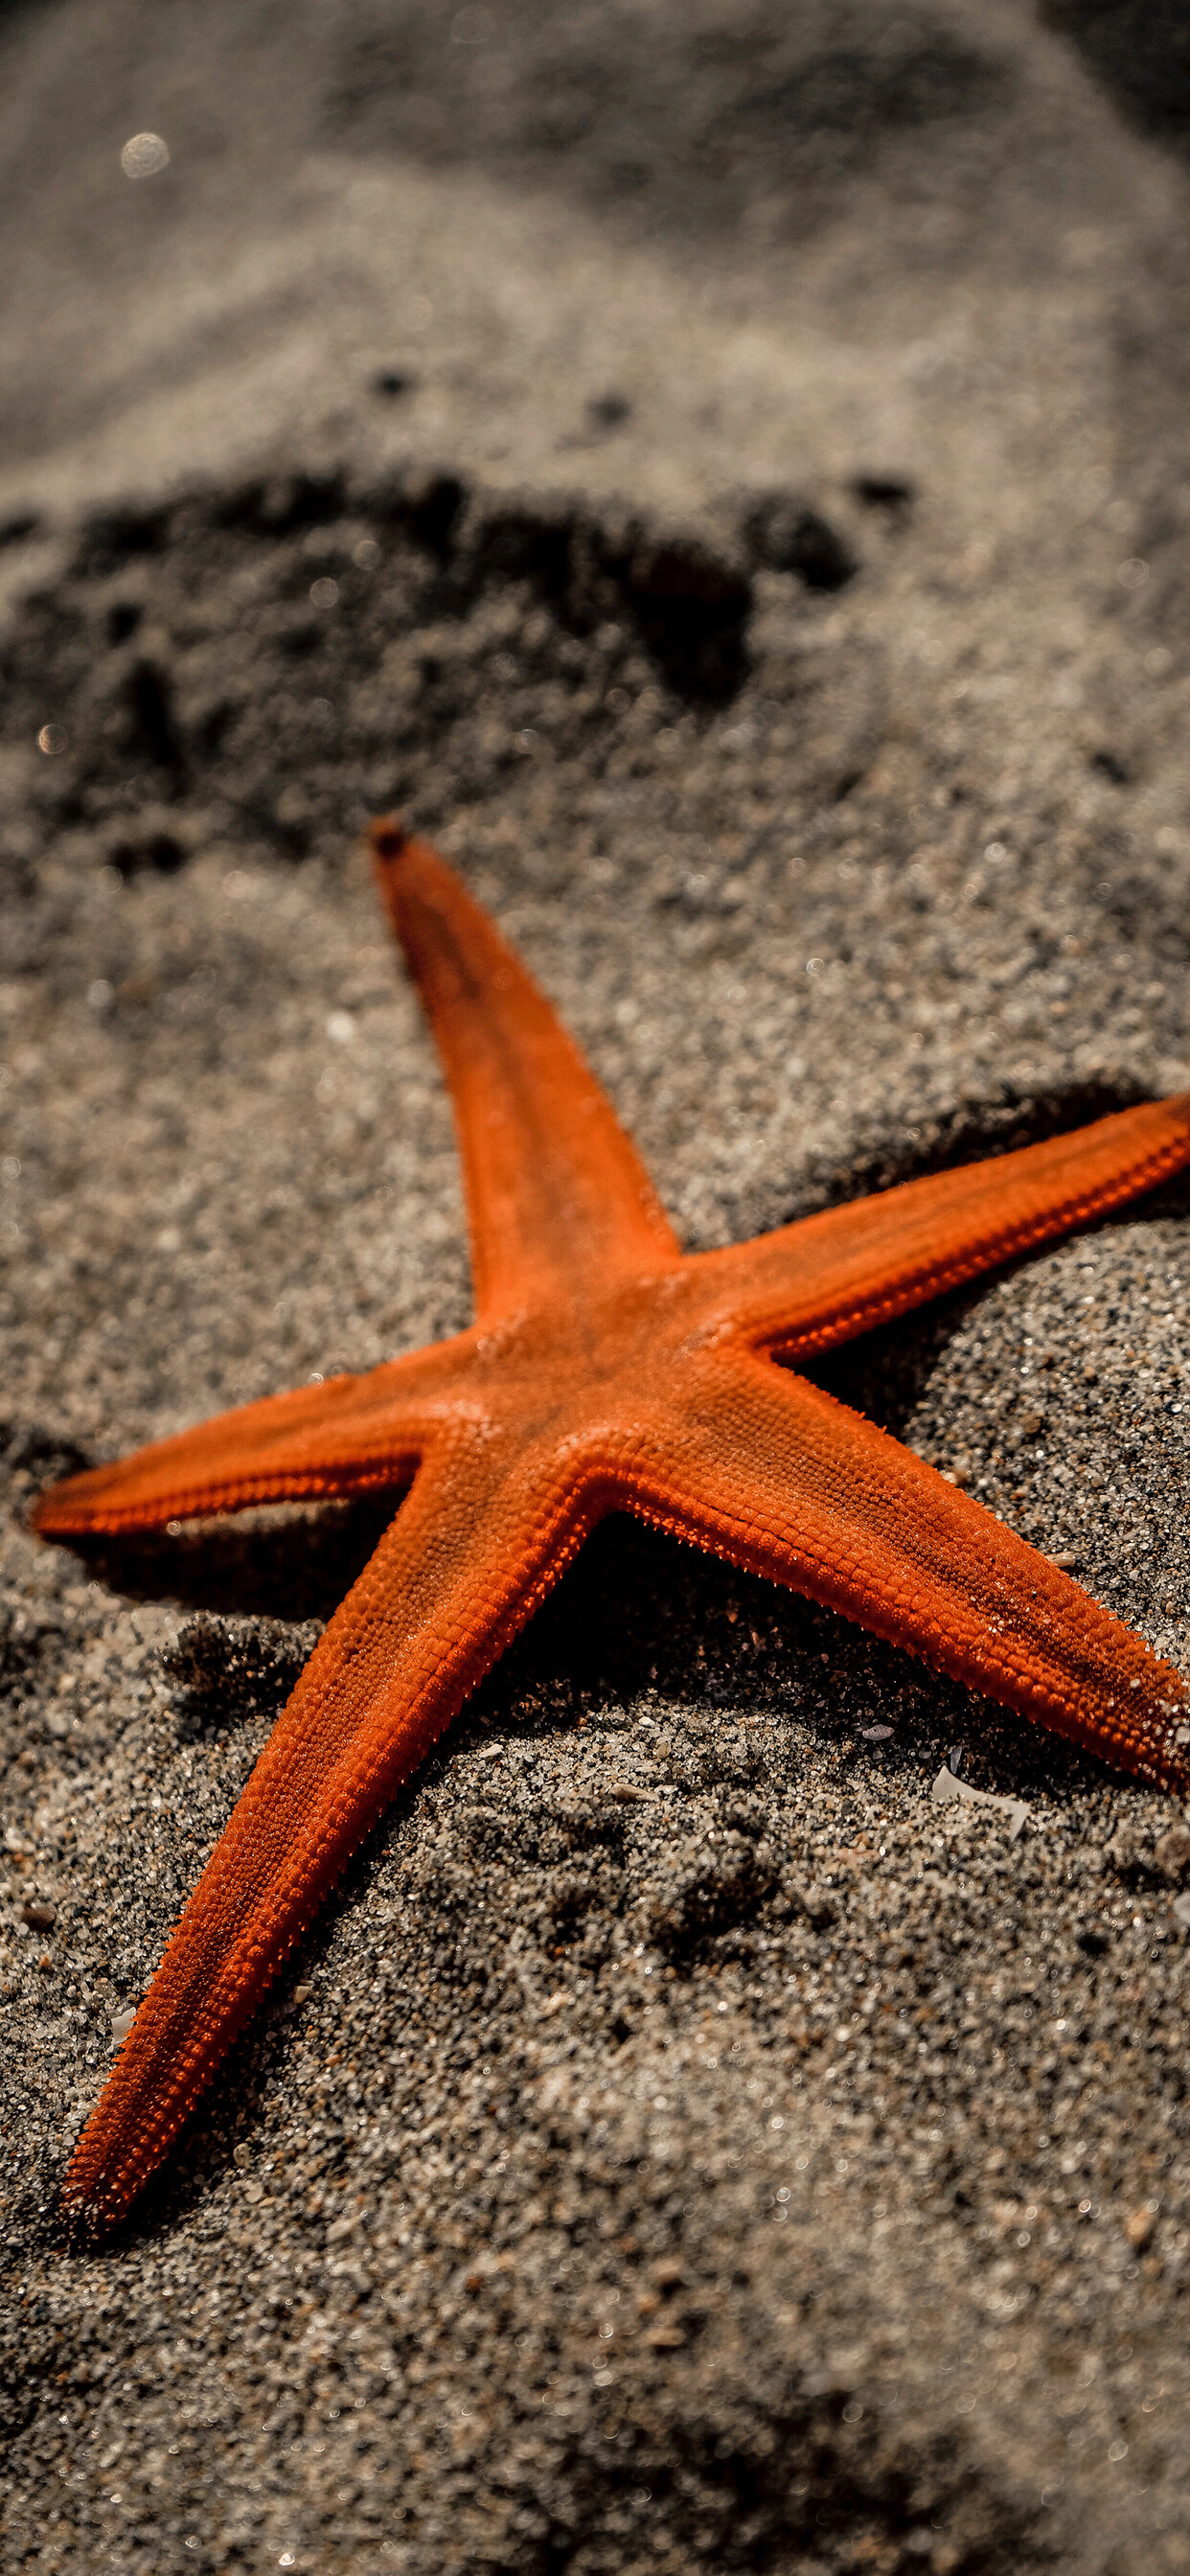 Starfish: Starfish Wallpaper for iPhone 11, Pro Max, X, 8, 7, 6 - Free Download on  3Wallpapers. 1250x2690 HD Wallpaper.